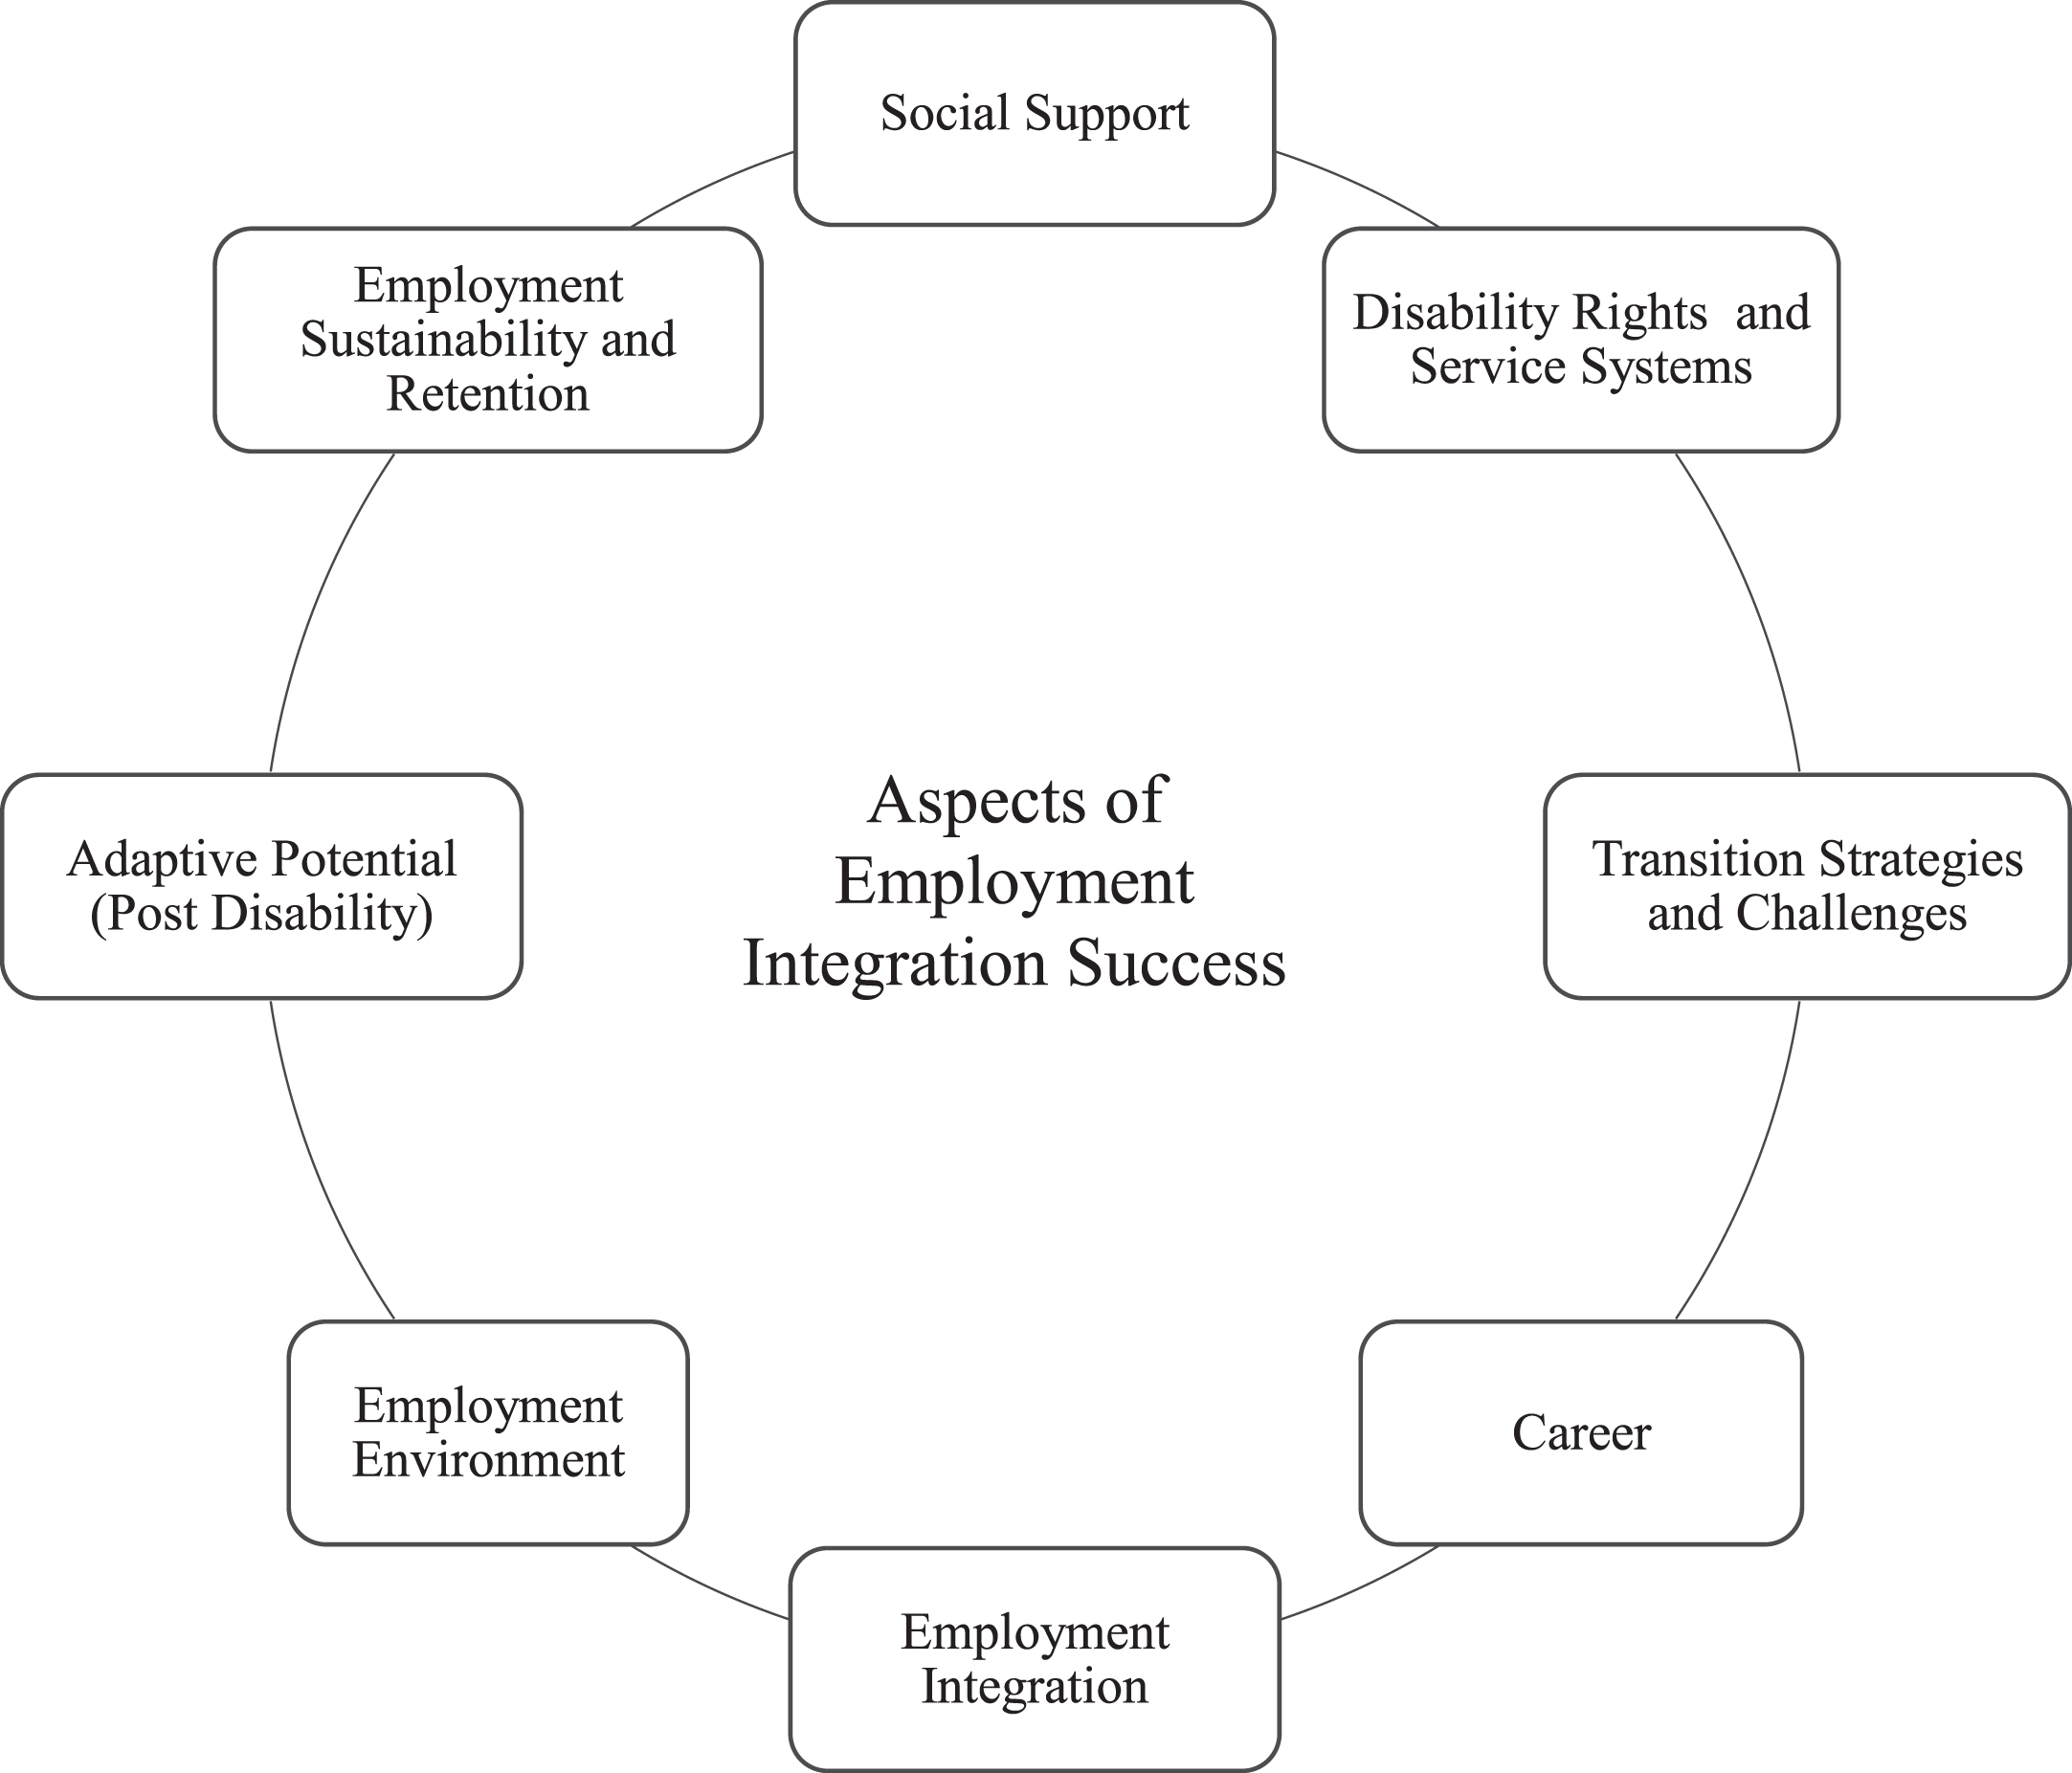 Aspects of employment integration success among people with vision impairment.